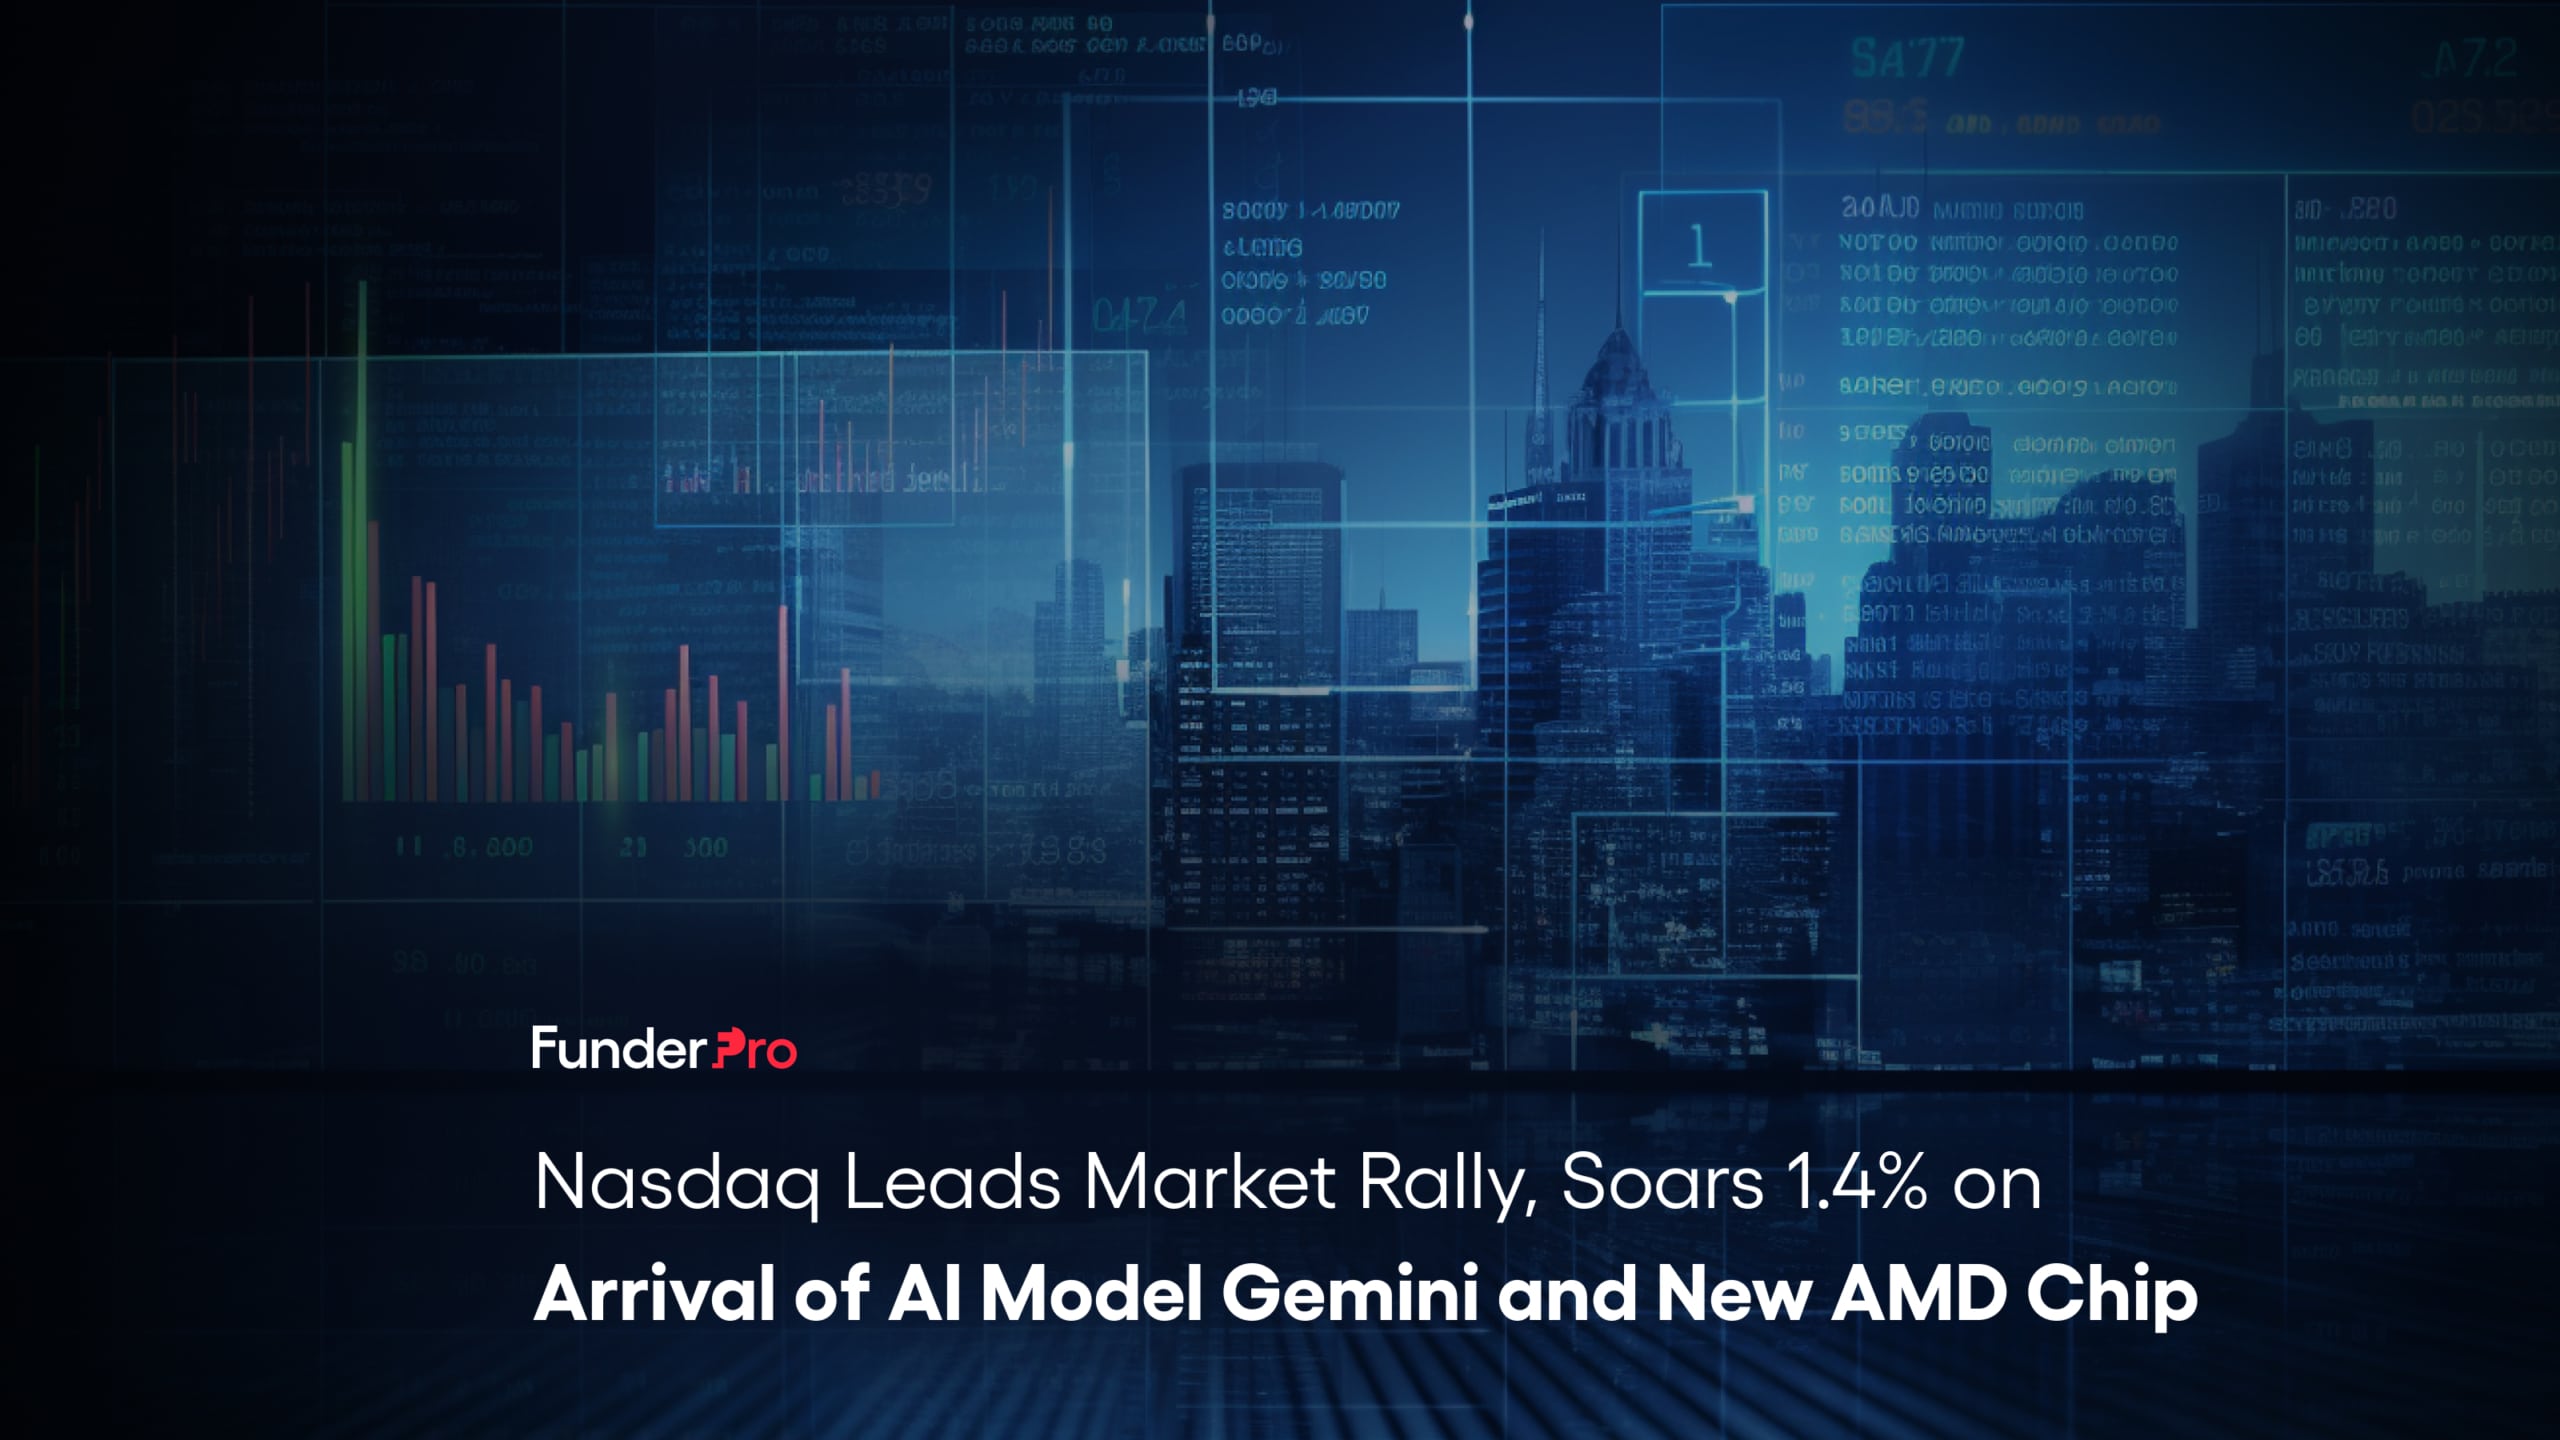 Nasdaq Leads Market Rally, Soars 1.4% on Arrival of AI Model Gemini and New AMD Chip